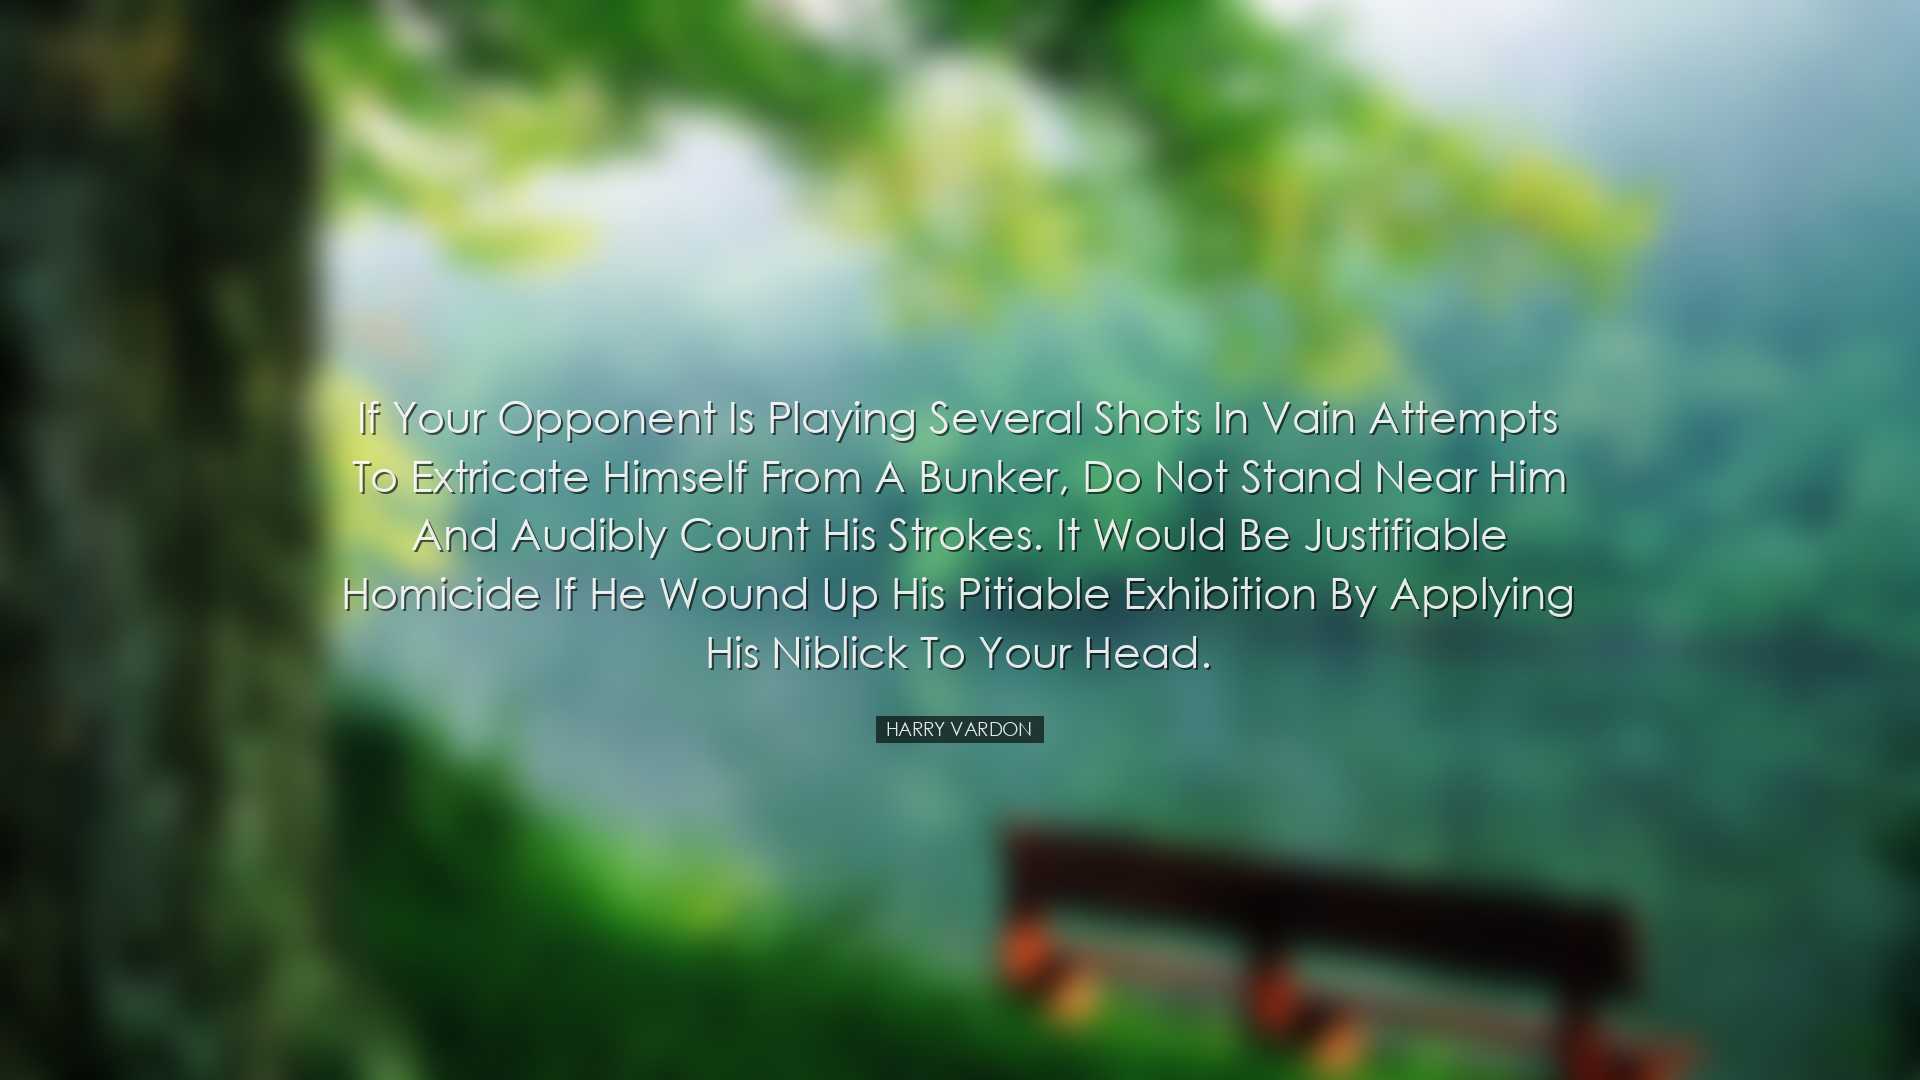 If your opponent is playing several shots in vain attempts to extr